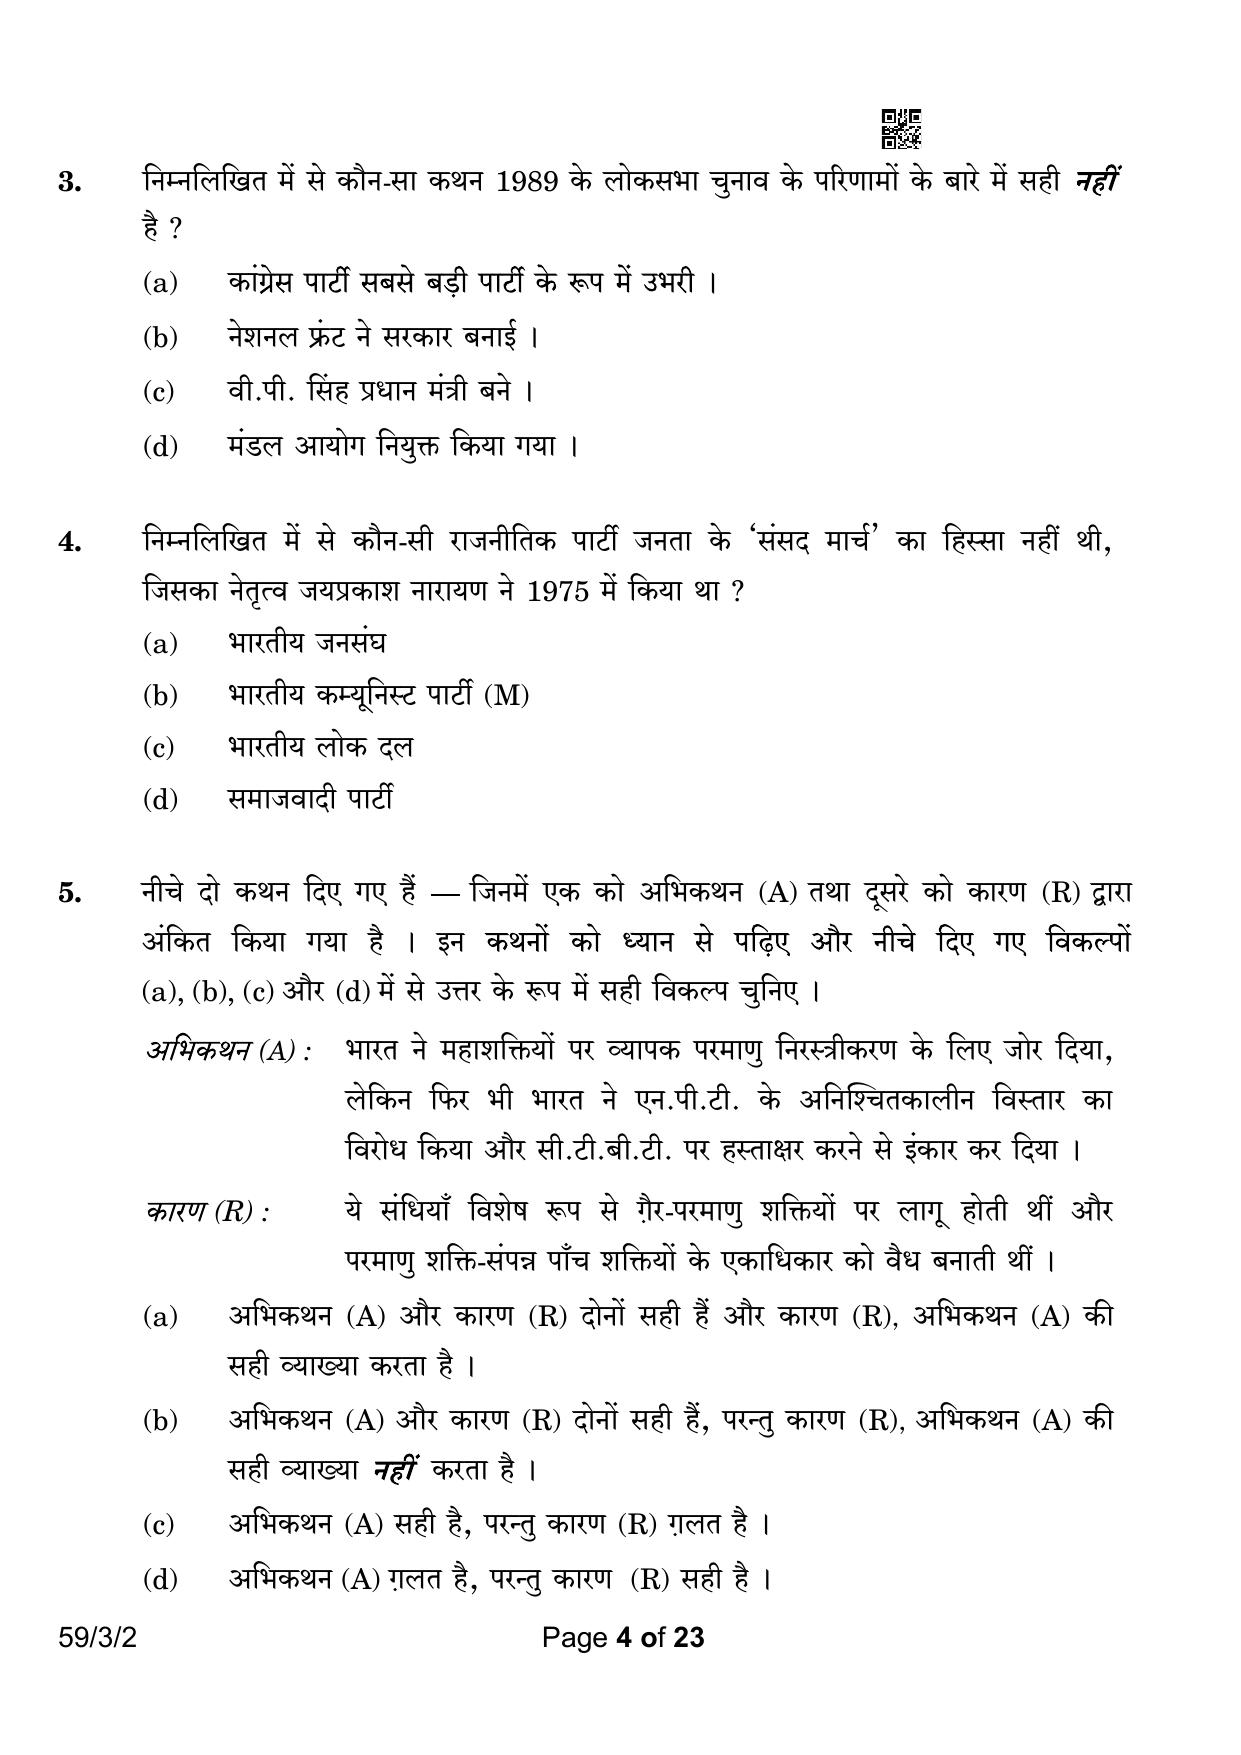 CBSE Class 12 59-3-2 Political Science 2023 Question Paper - Page 4